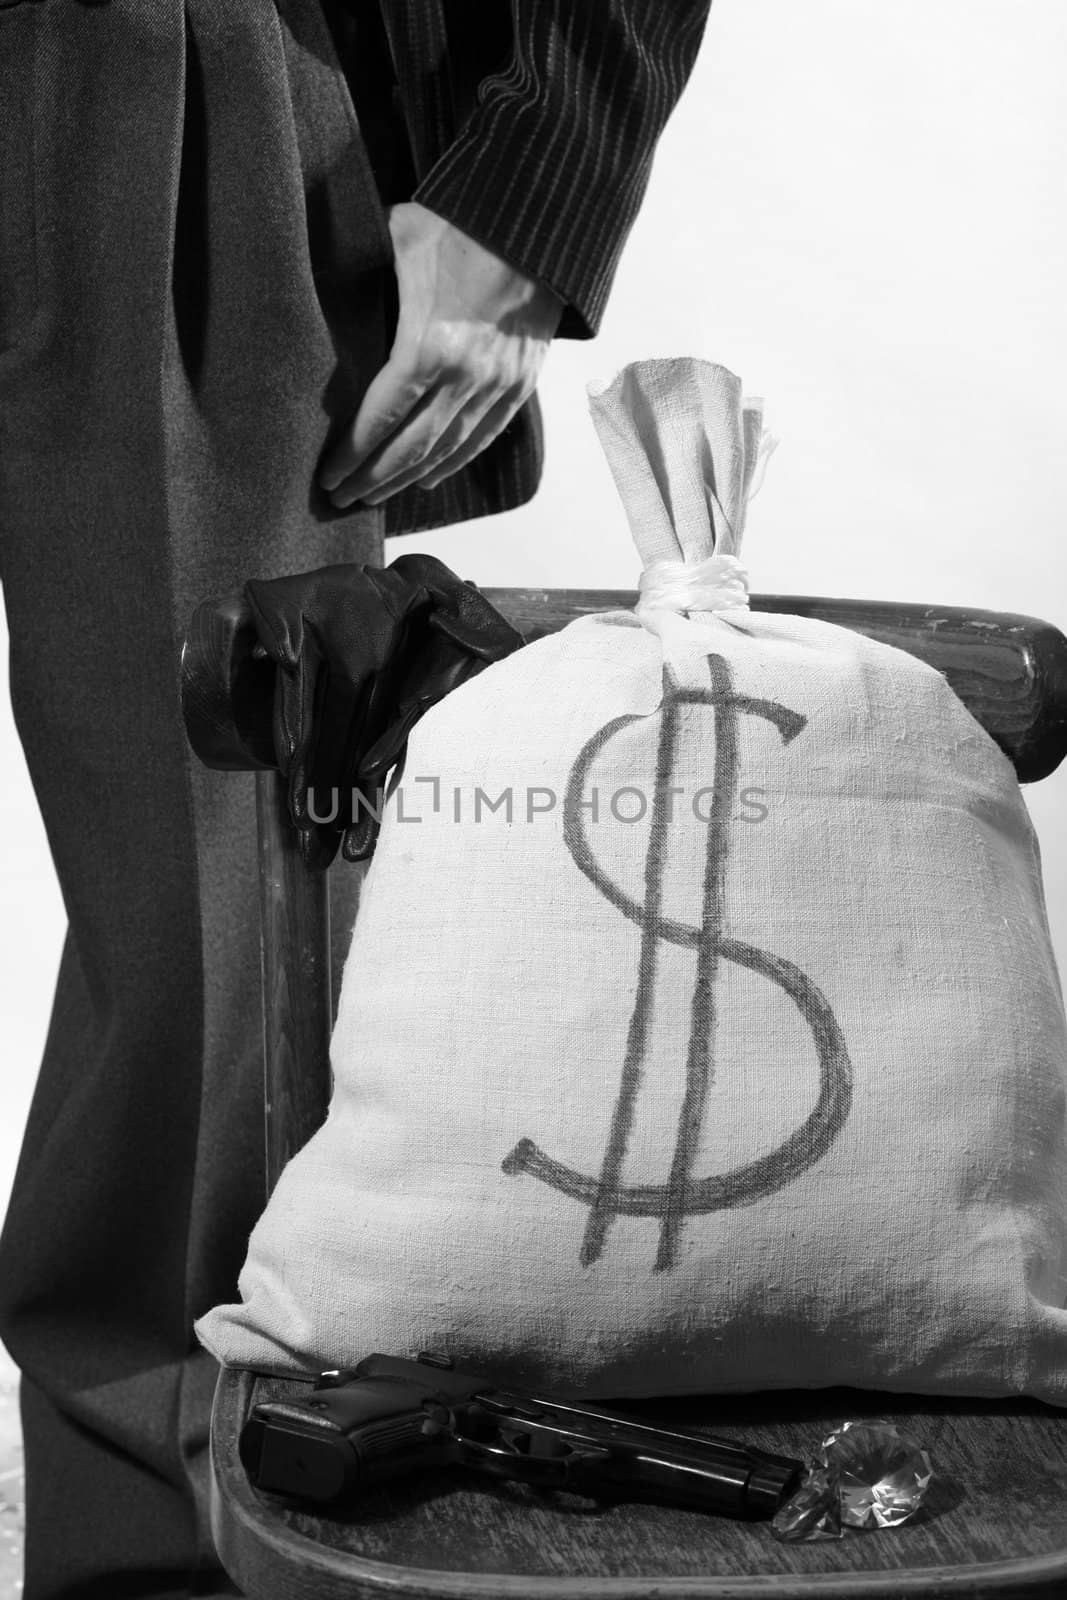 An image of a sack on a chair and man behind it